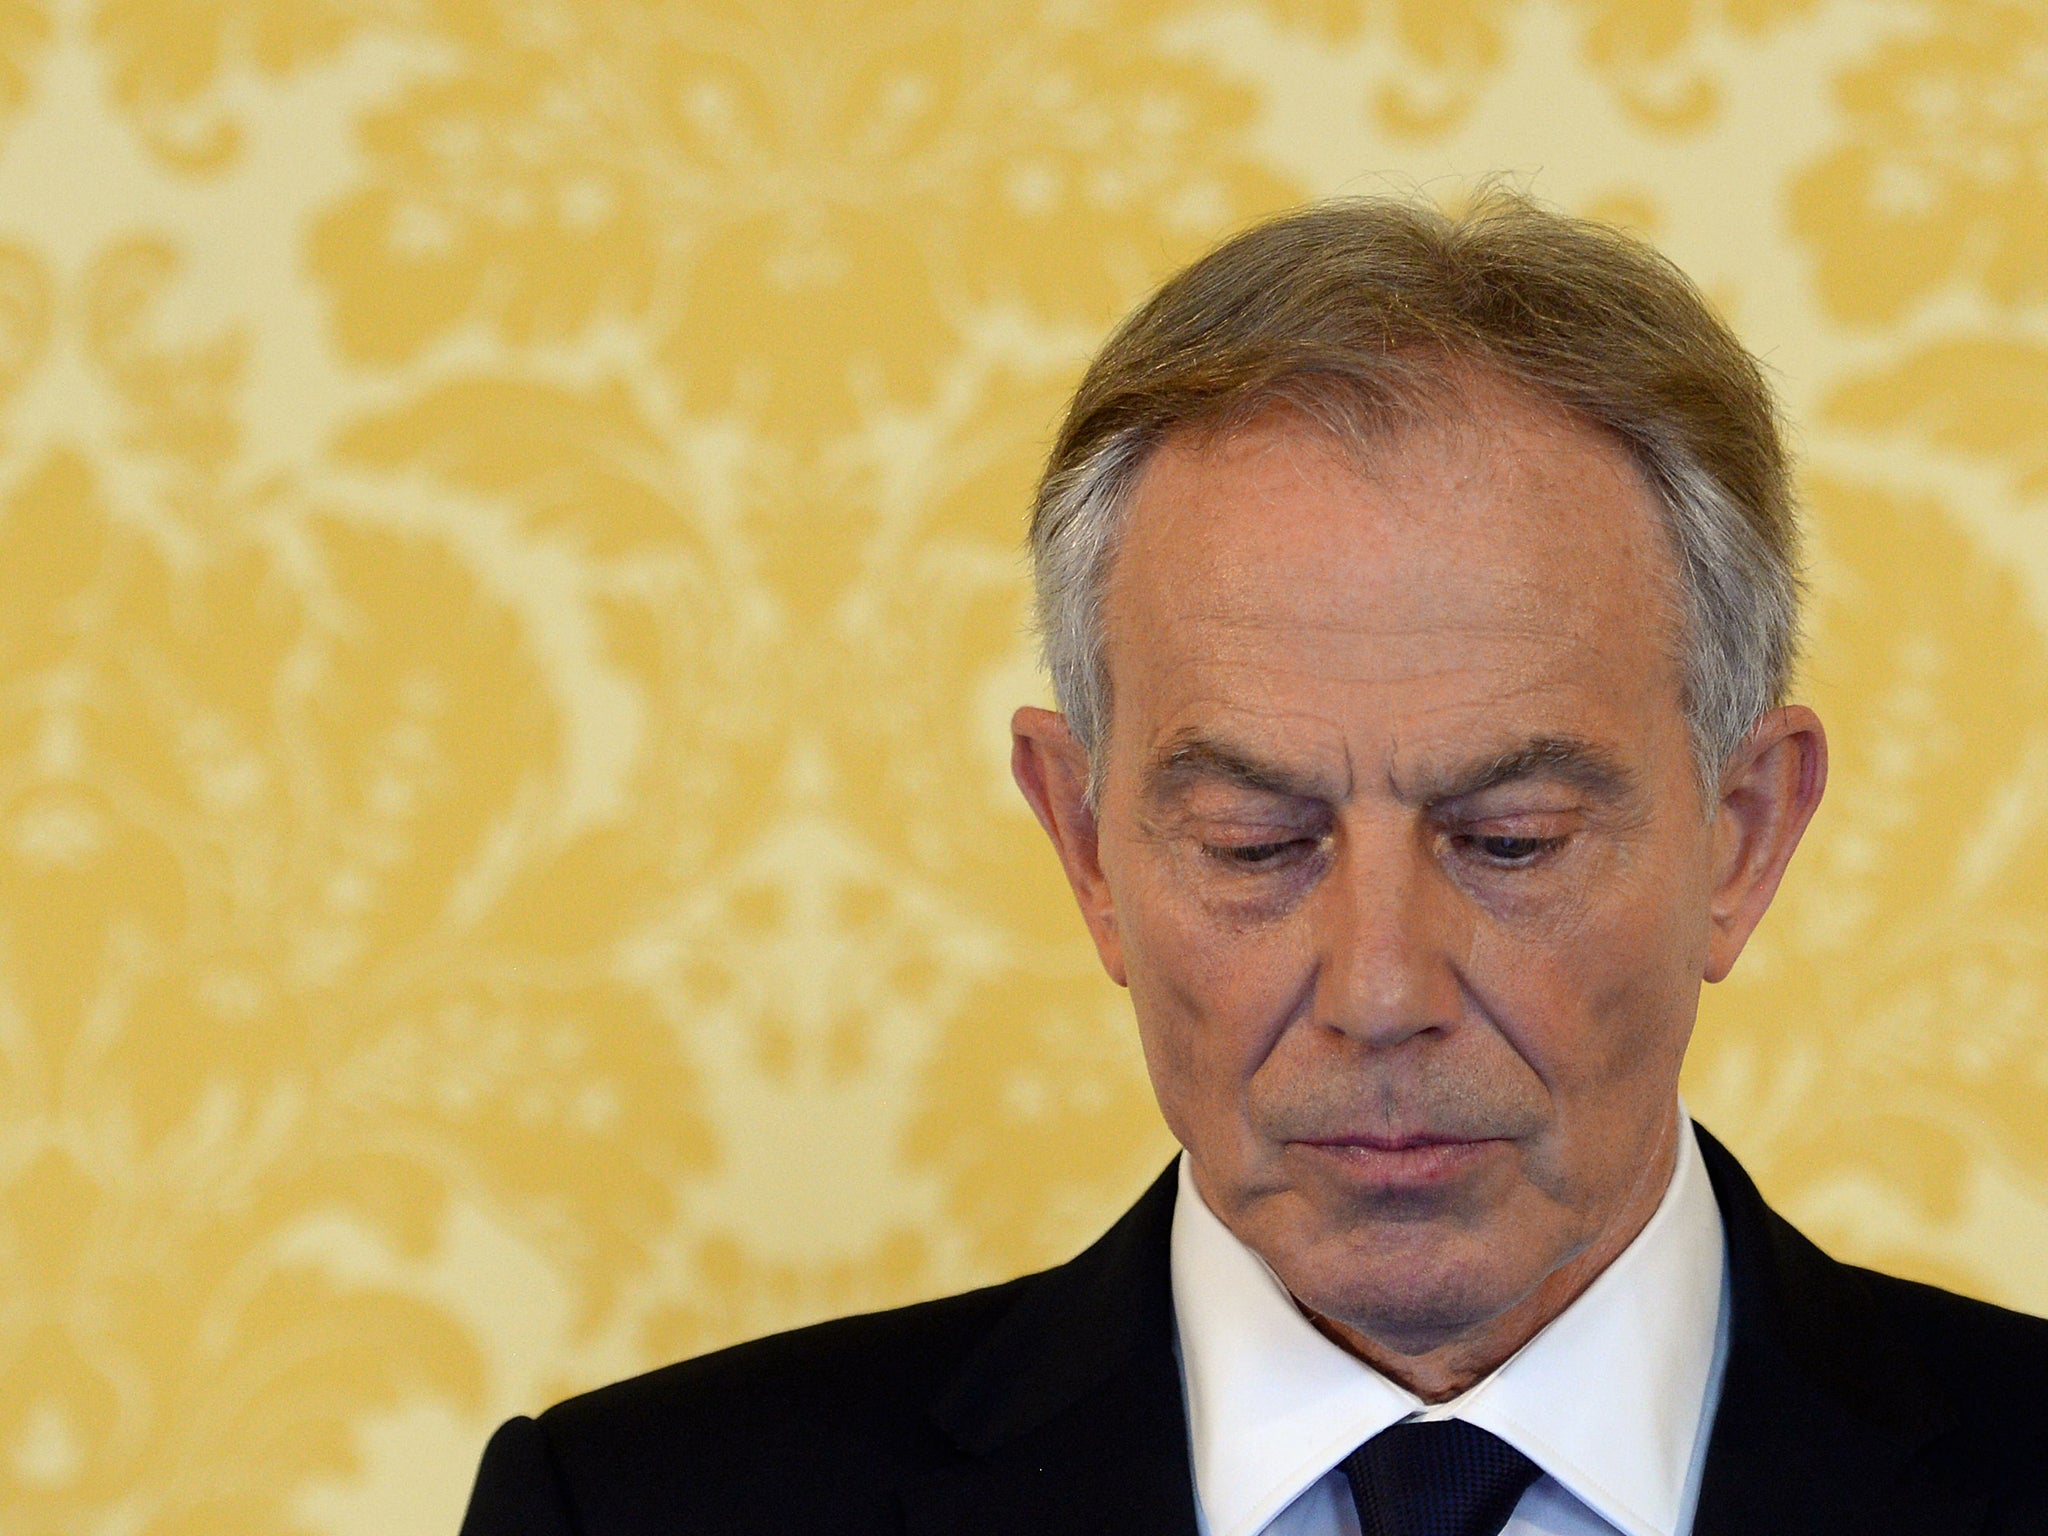 Tony Blair was found to have disregarded cabinet procedures in the run up to the Iraq War